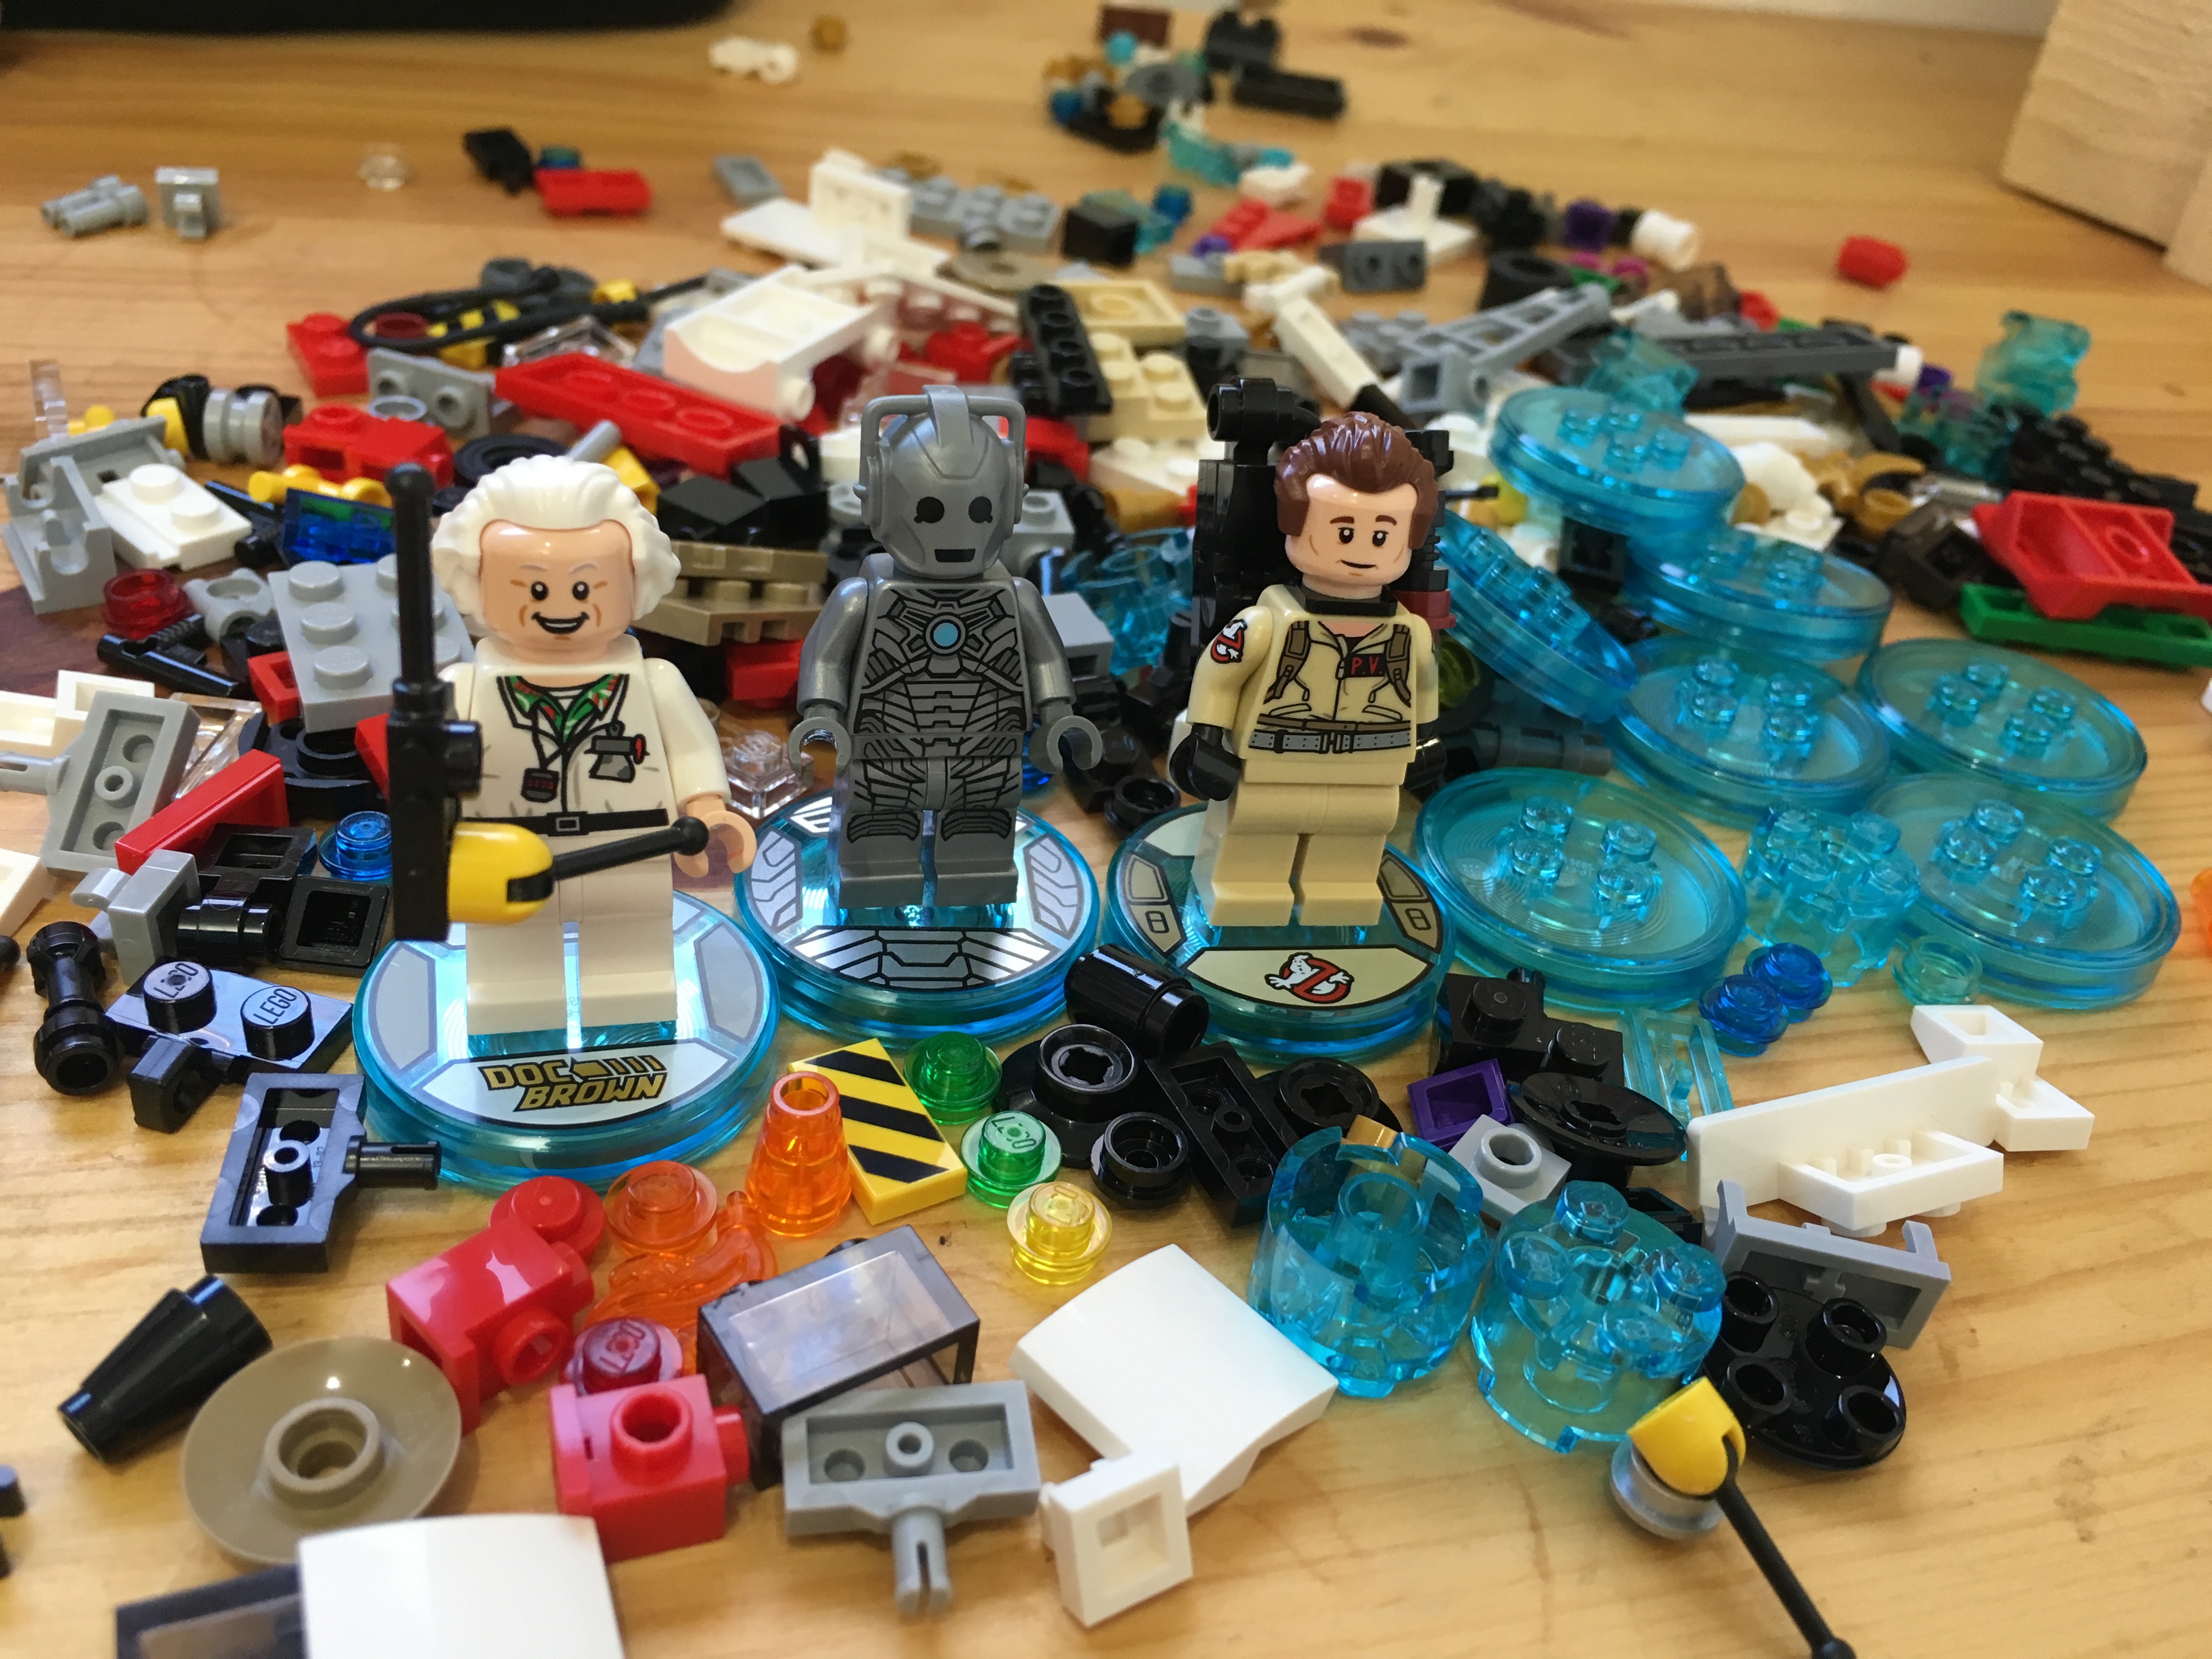 Ghostbusters and Cyberman minifigures unboxed